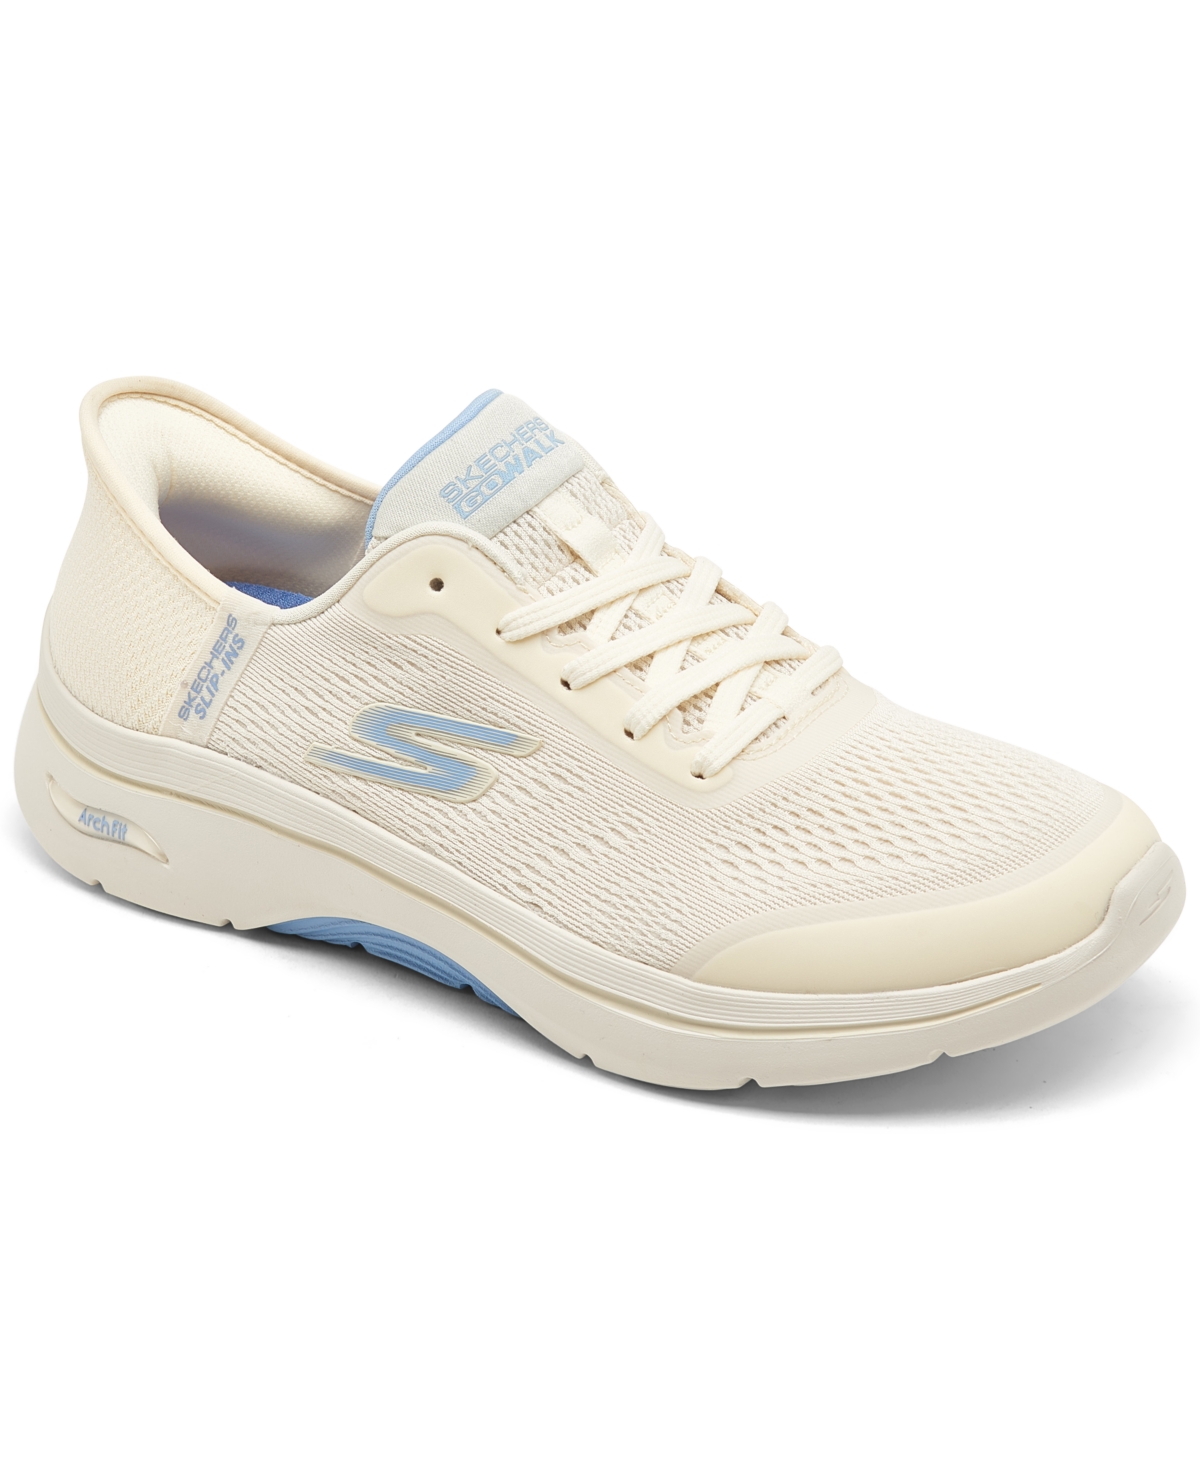 Women's Slip-Ins: Go Walk Arch Fit 2.0 Walking Sneakers from Finish Line - Natural/light blue